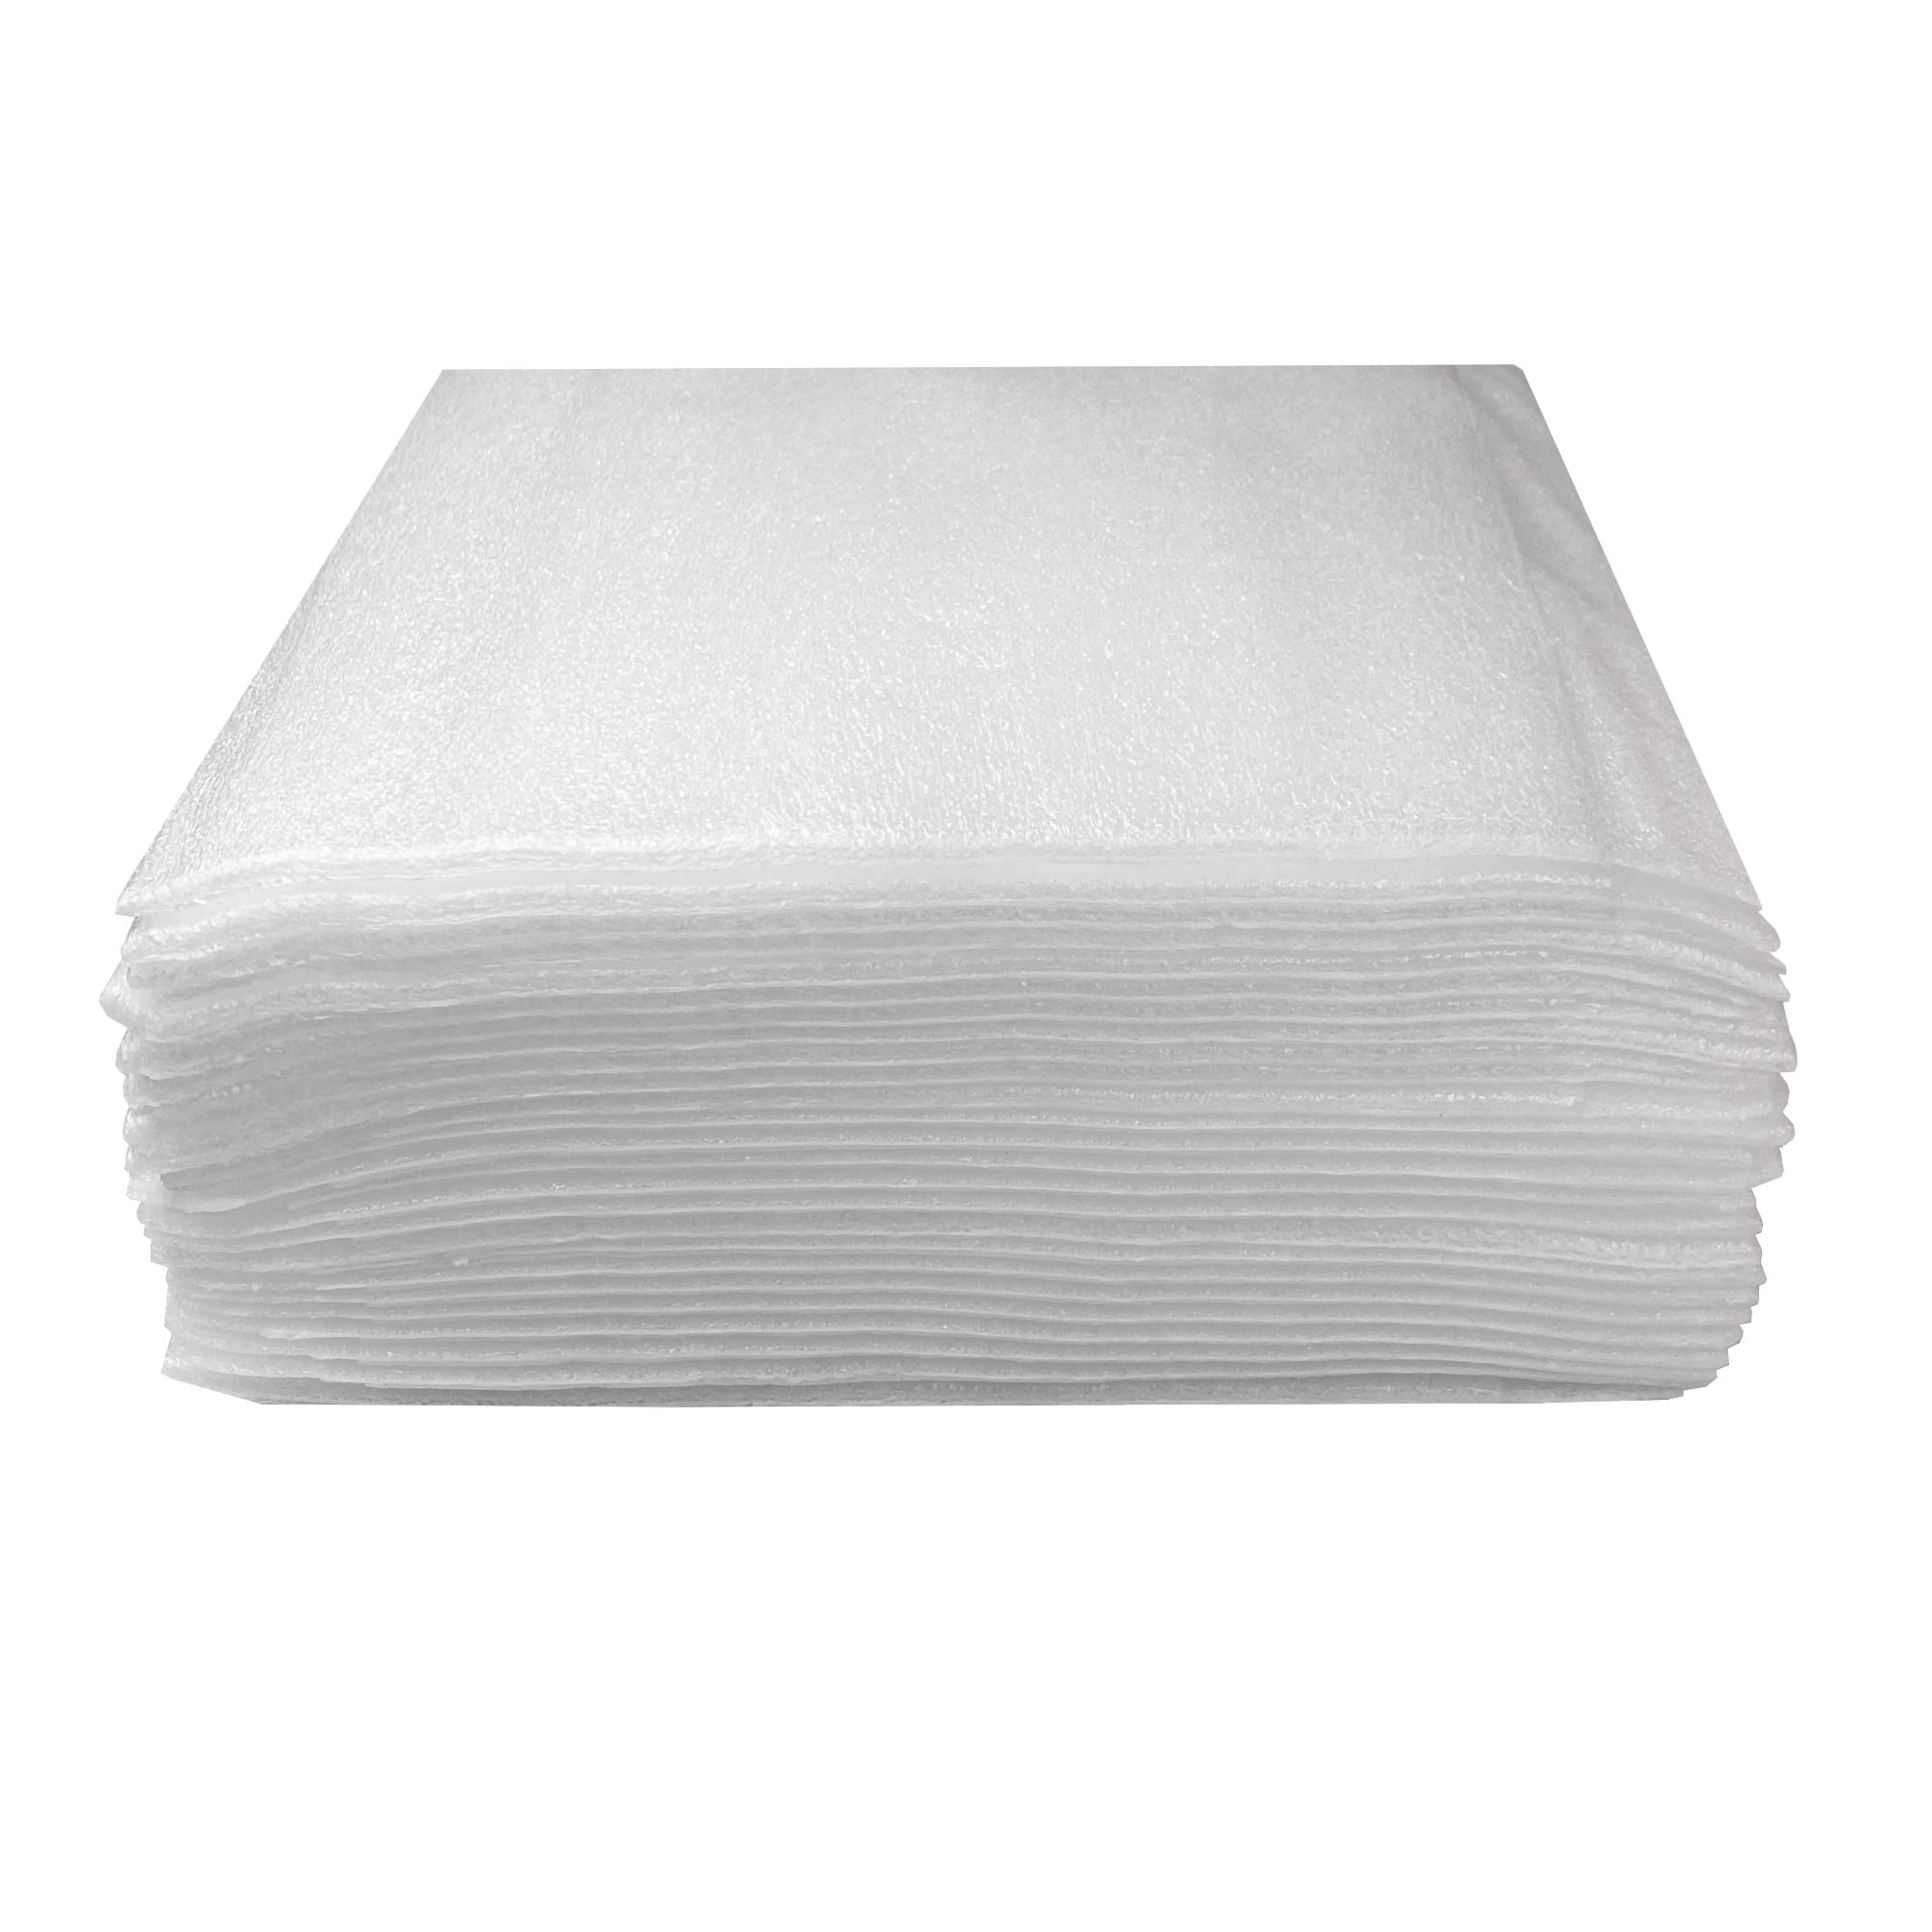 Saucer & Dish Cushioning Wrap Pack of 10 EcoBox Foam Pouch 7 x 8 E-4178 